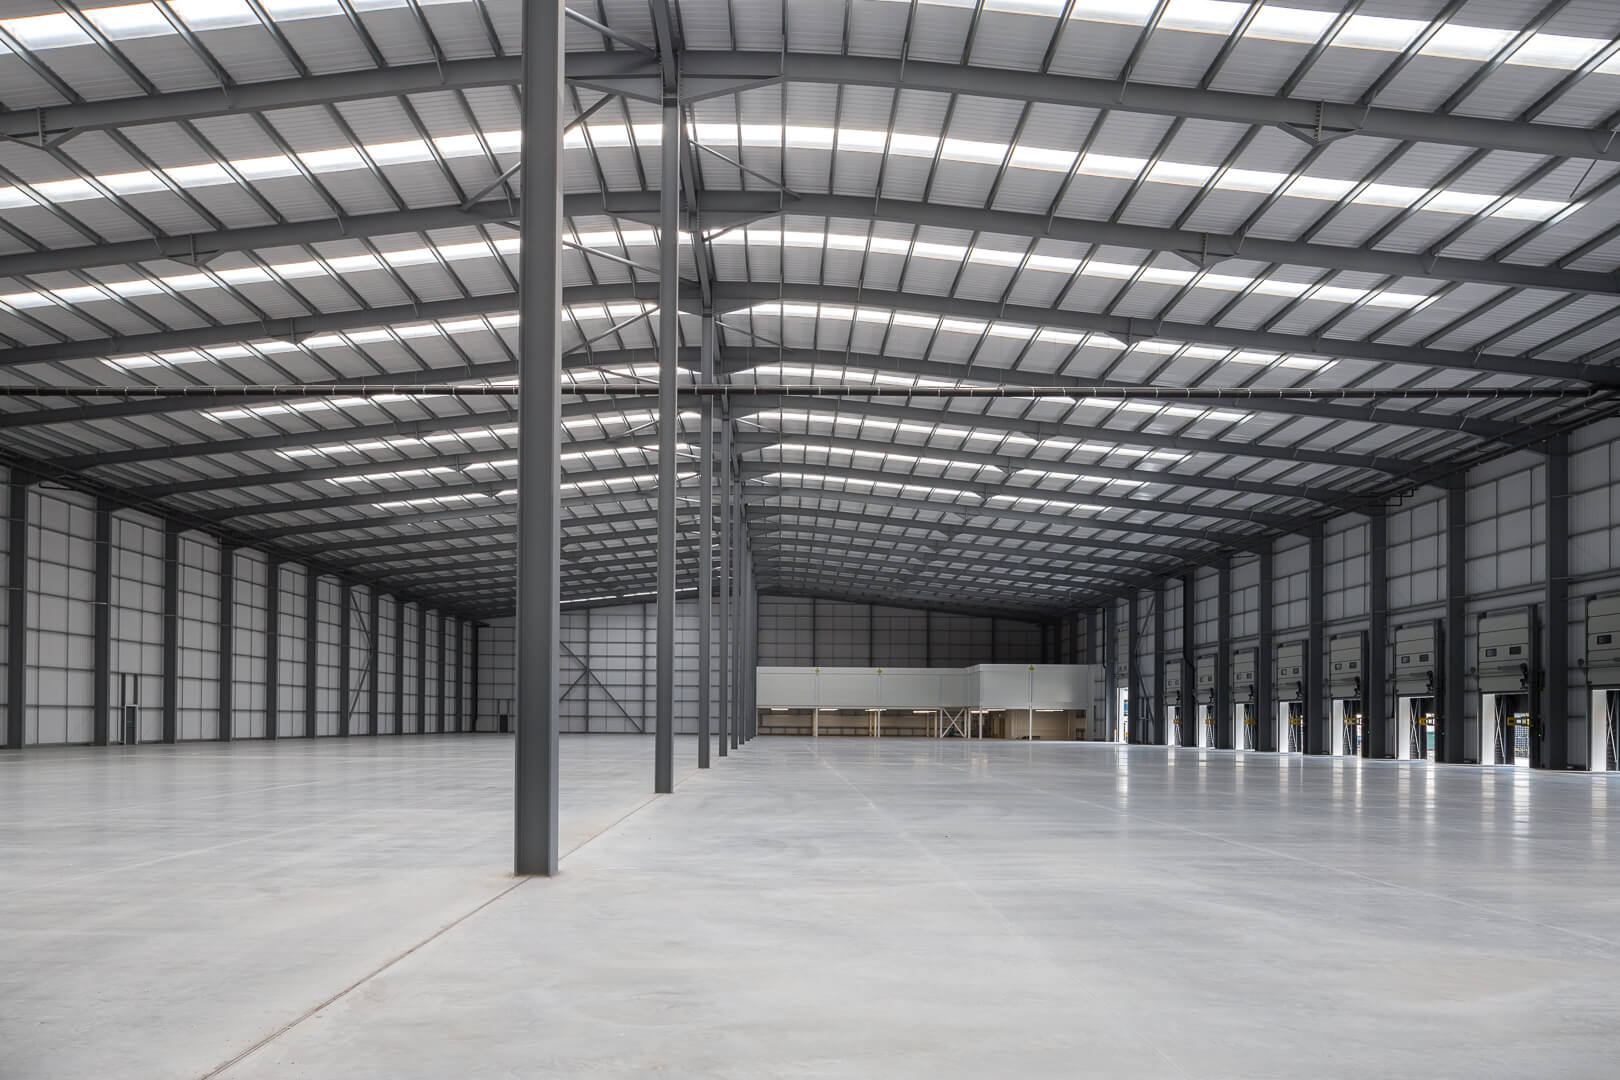 Commercial architecture and interior photography - New construction at Link 95, Hareshill Distribution Park, Lancashire